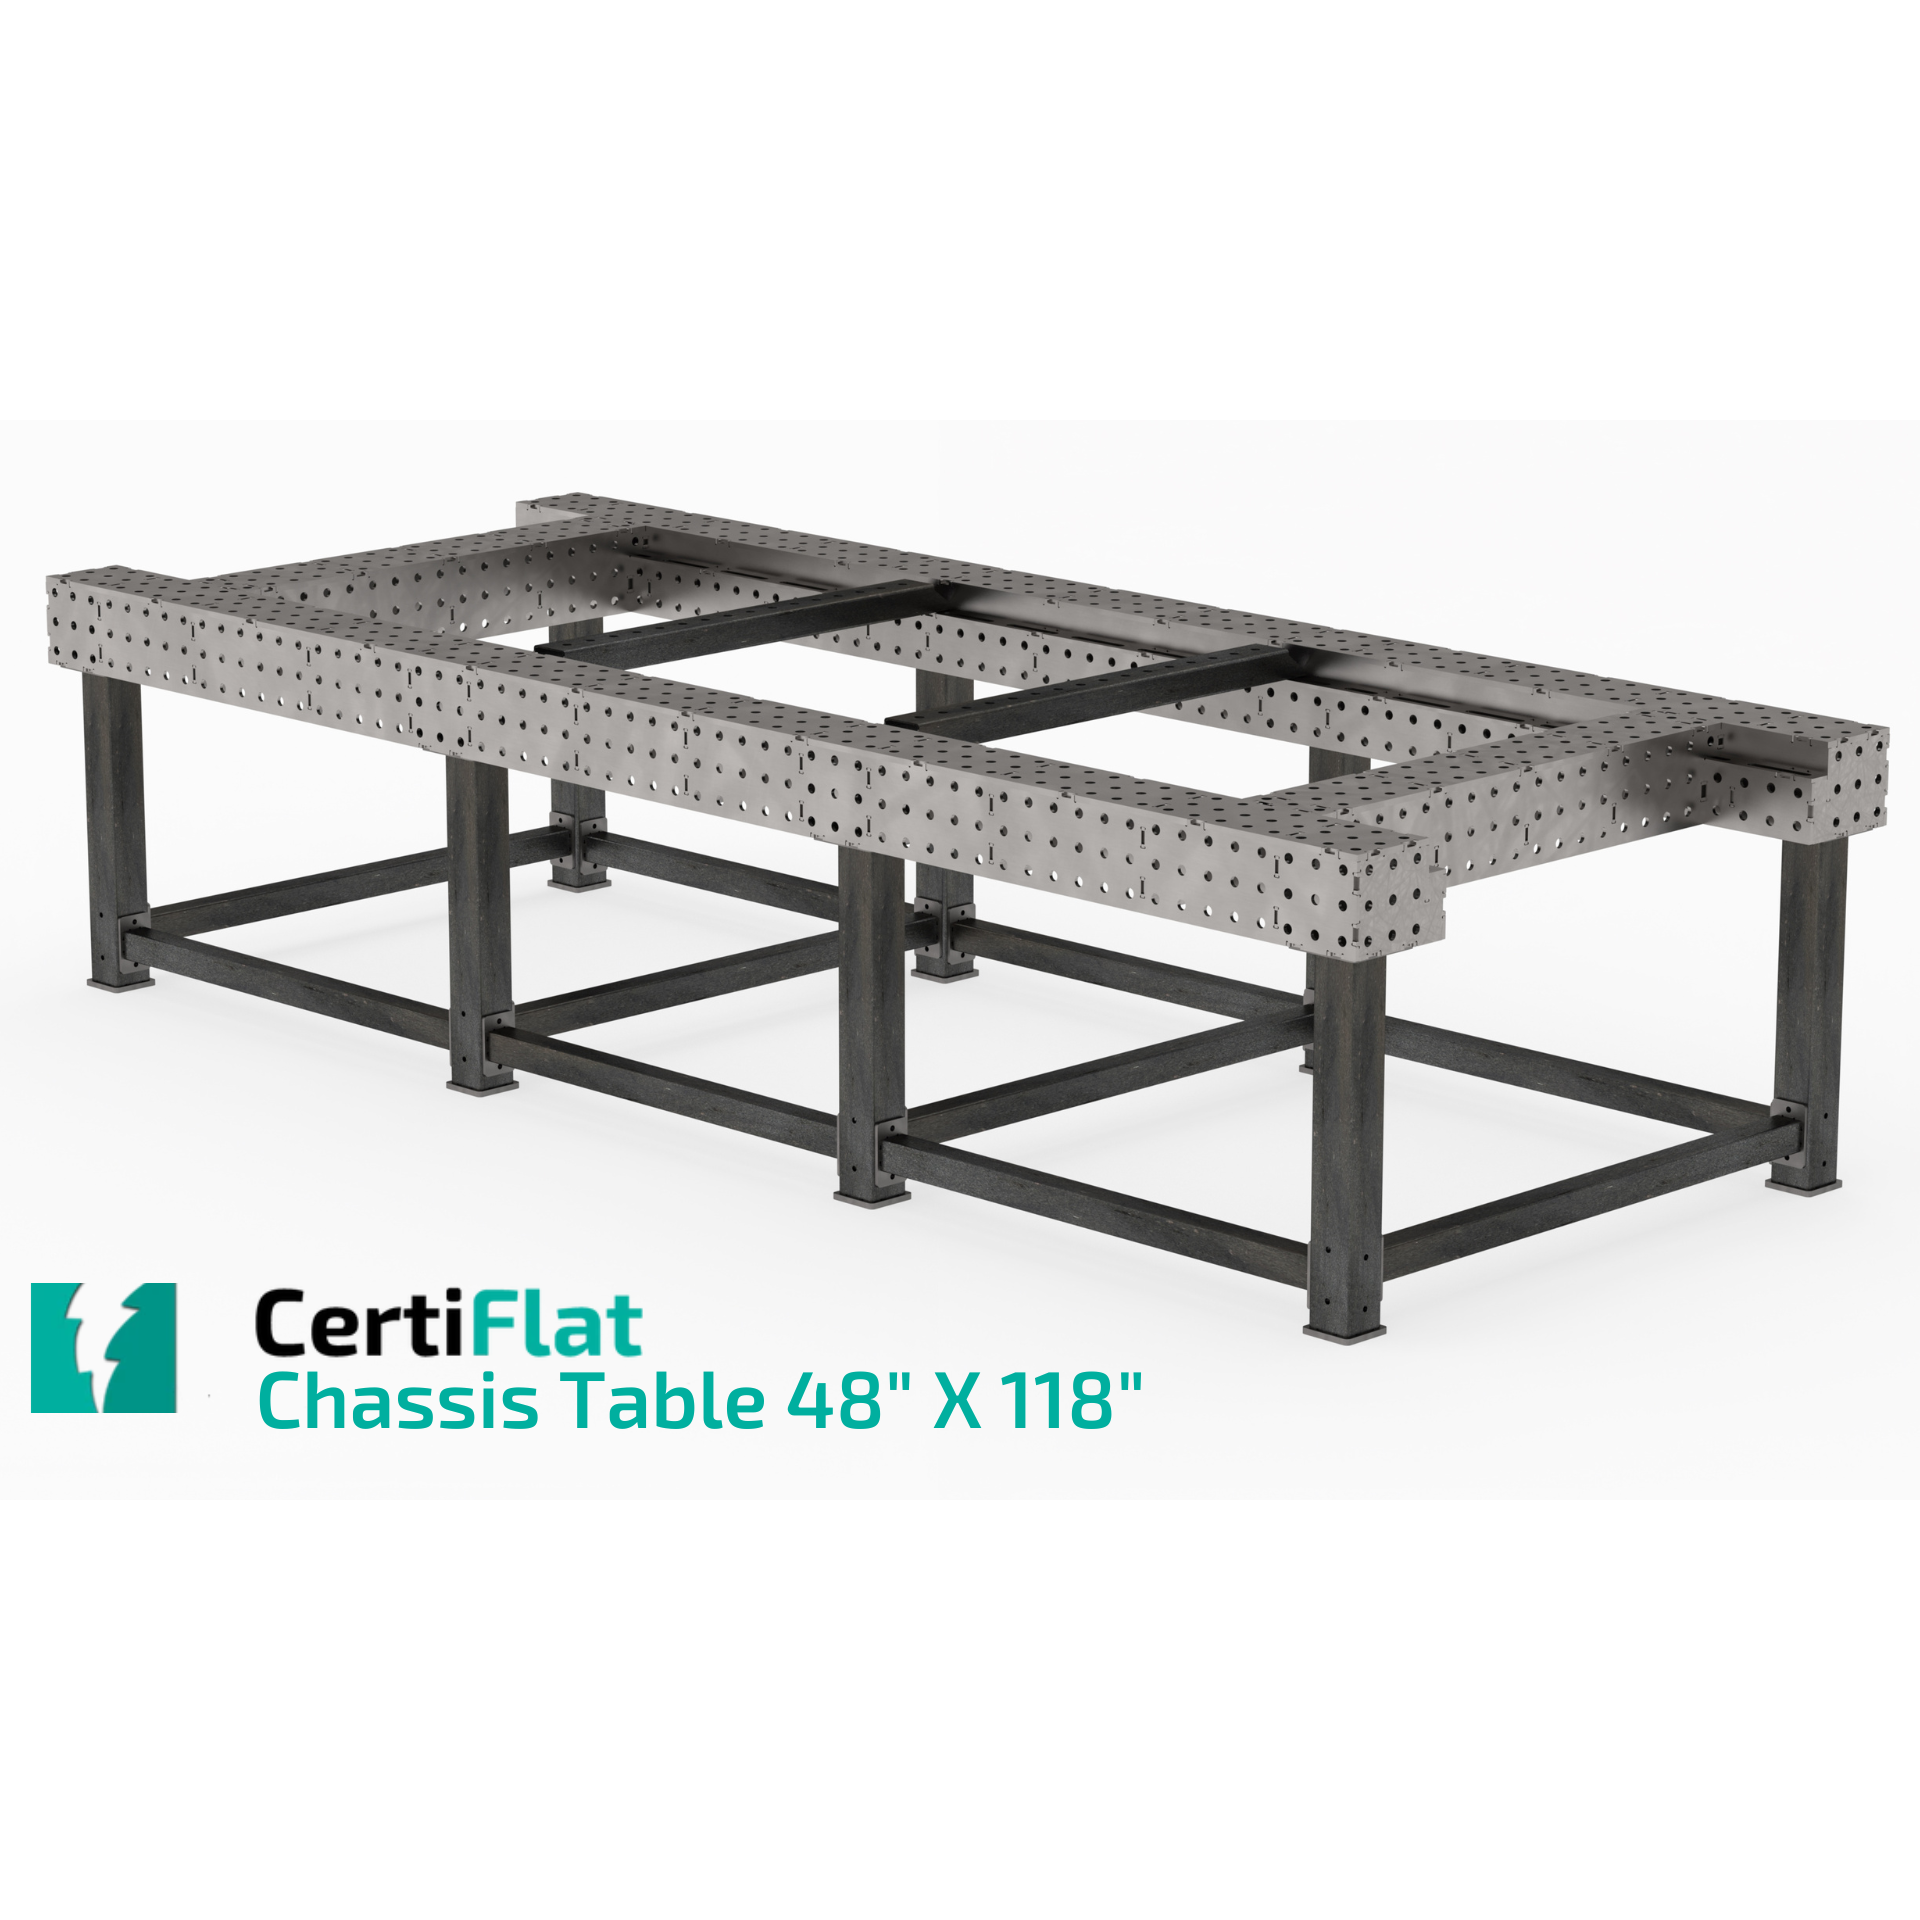 CertiFlat Chassis Table 48" X 118", Fabrication Table Heavy Duty